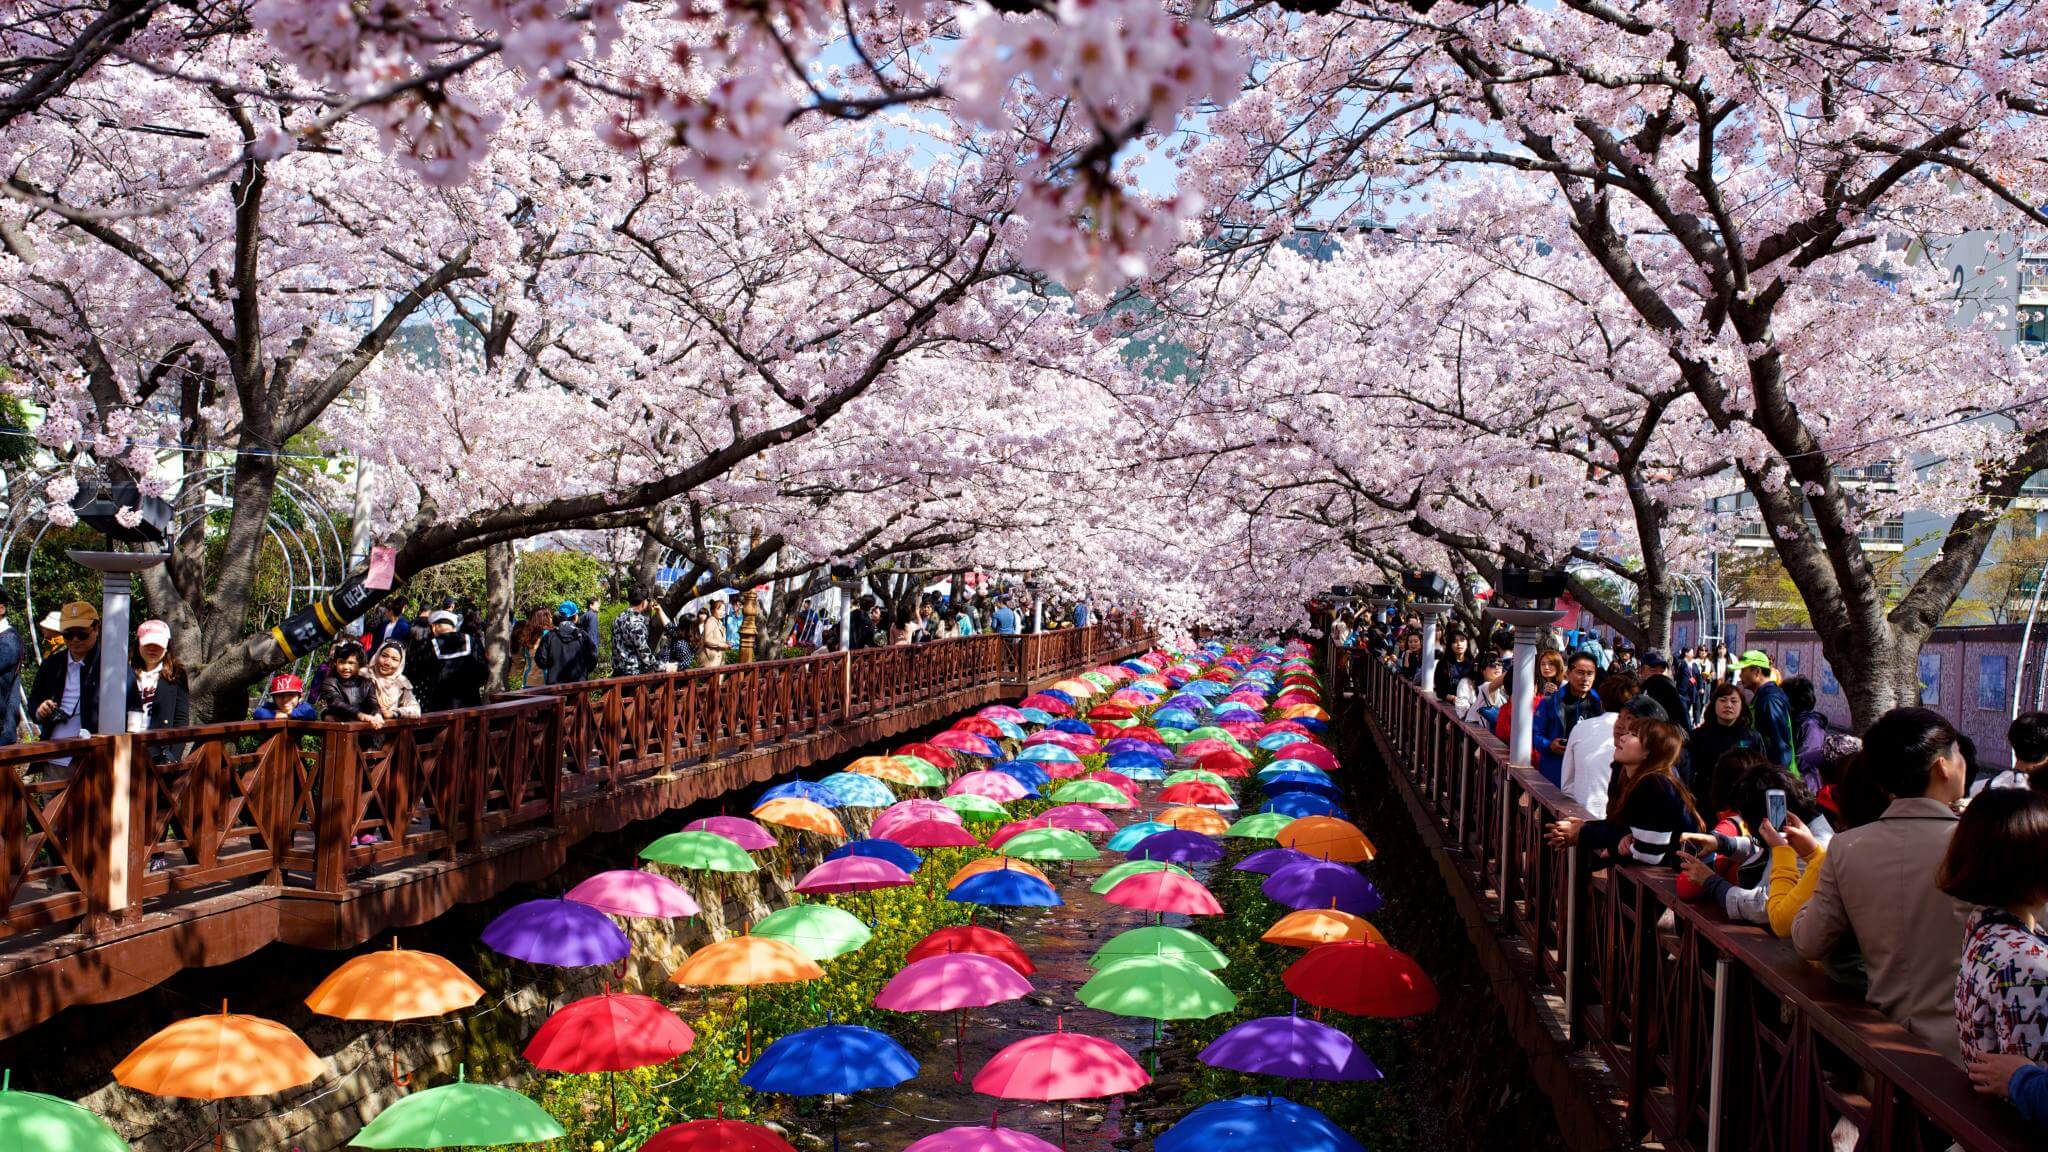 Where And When To See Cherry Blossom In Korea